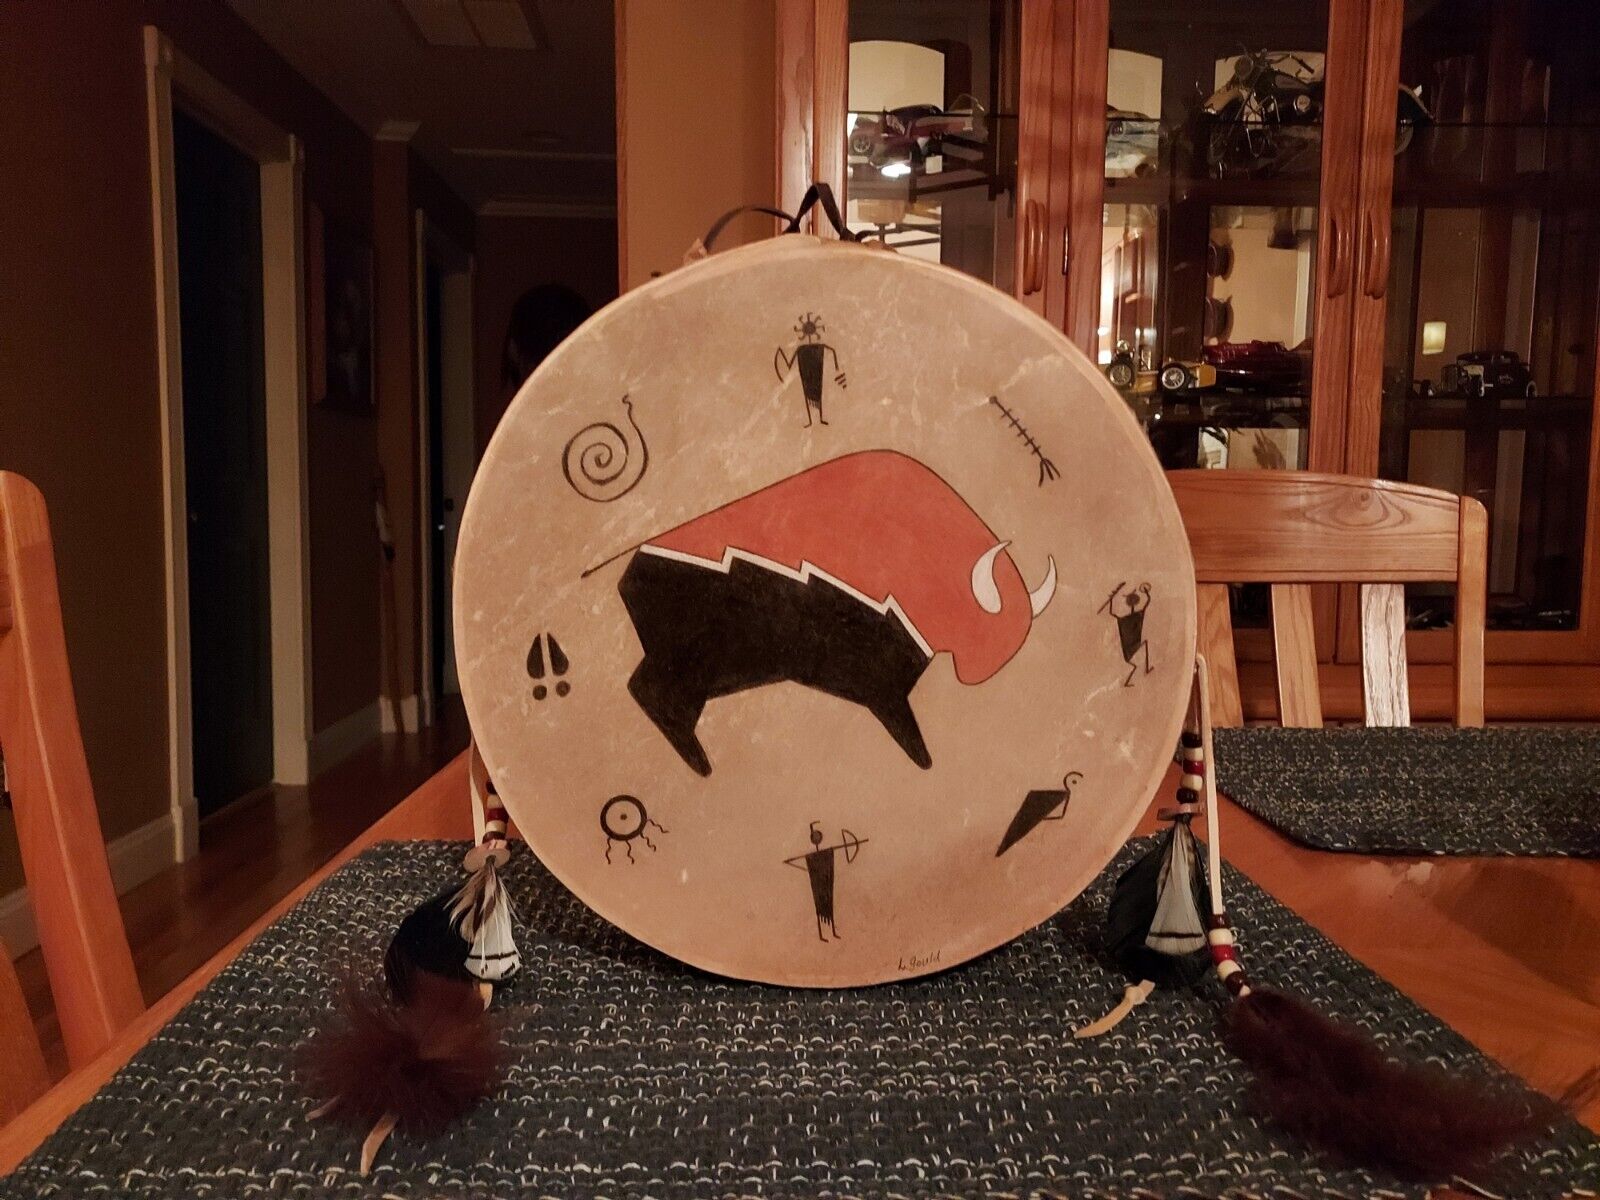 Native American Hand Painted 12 Inch Rawhide Drum signed